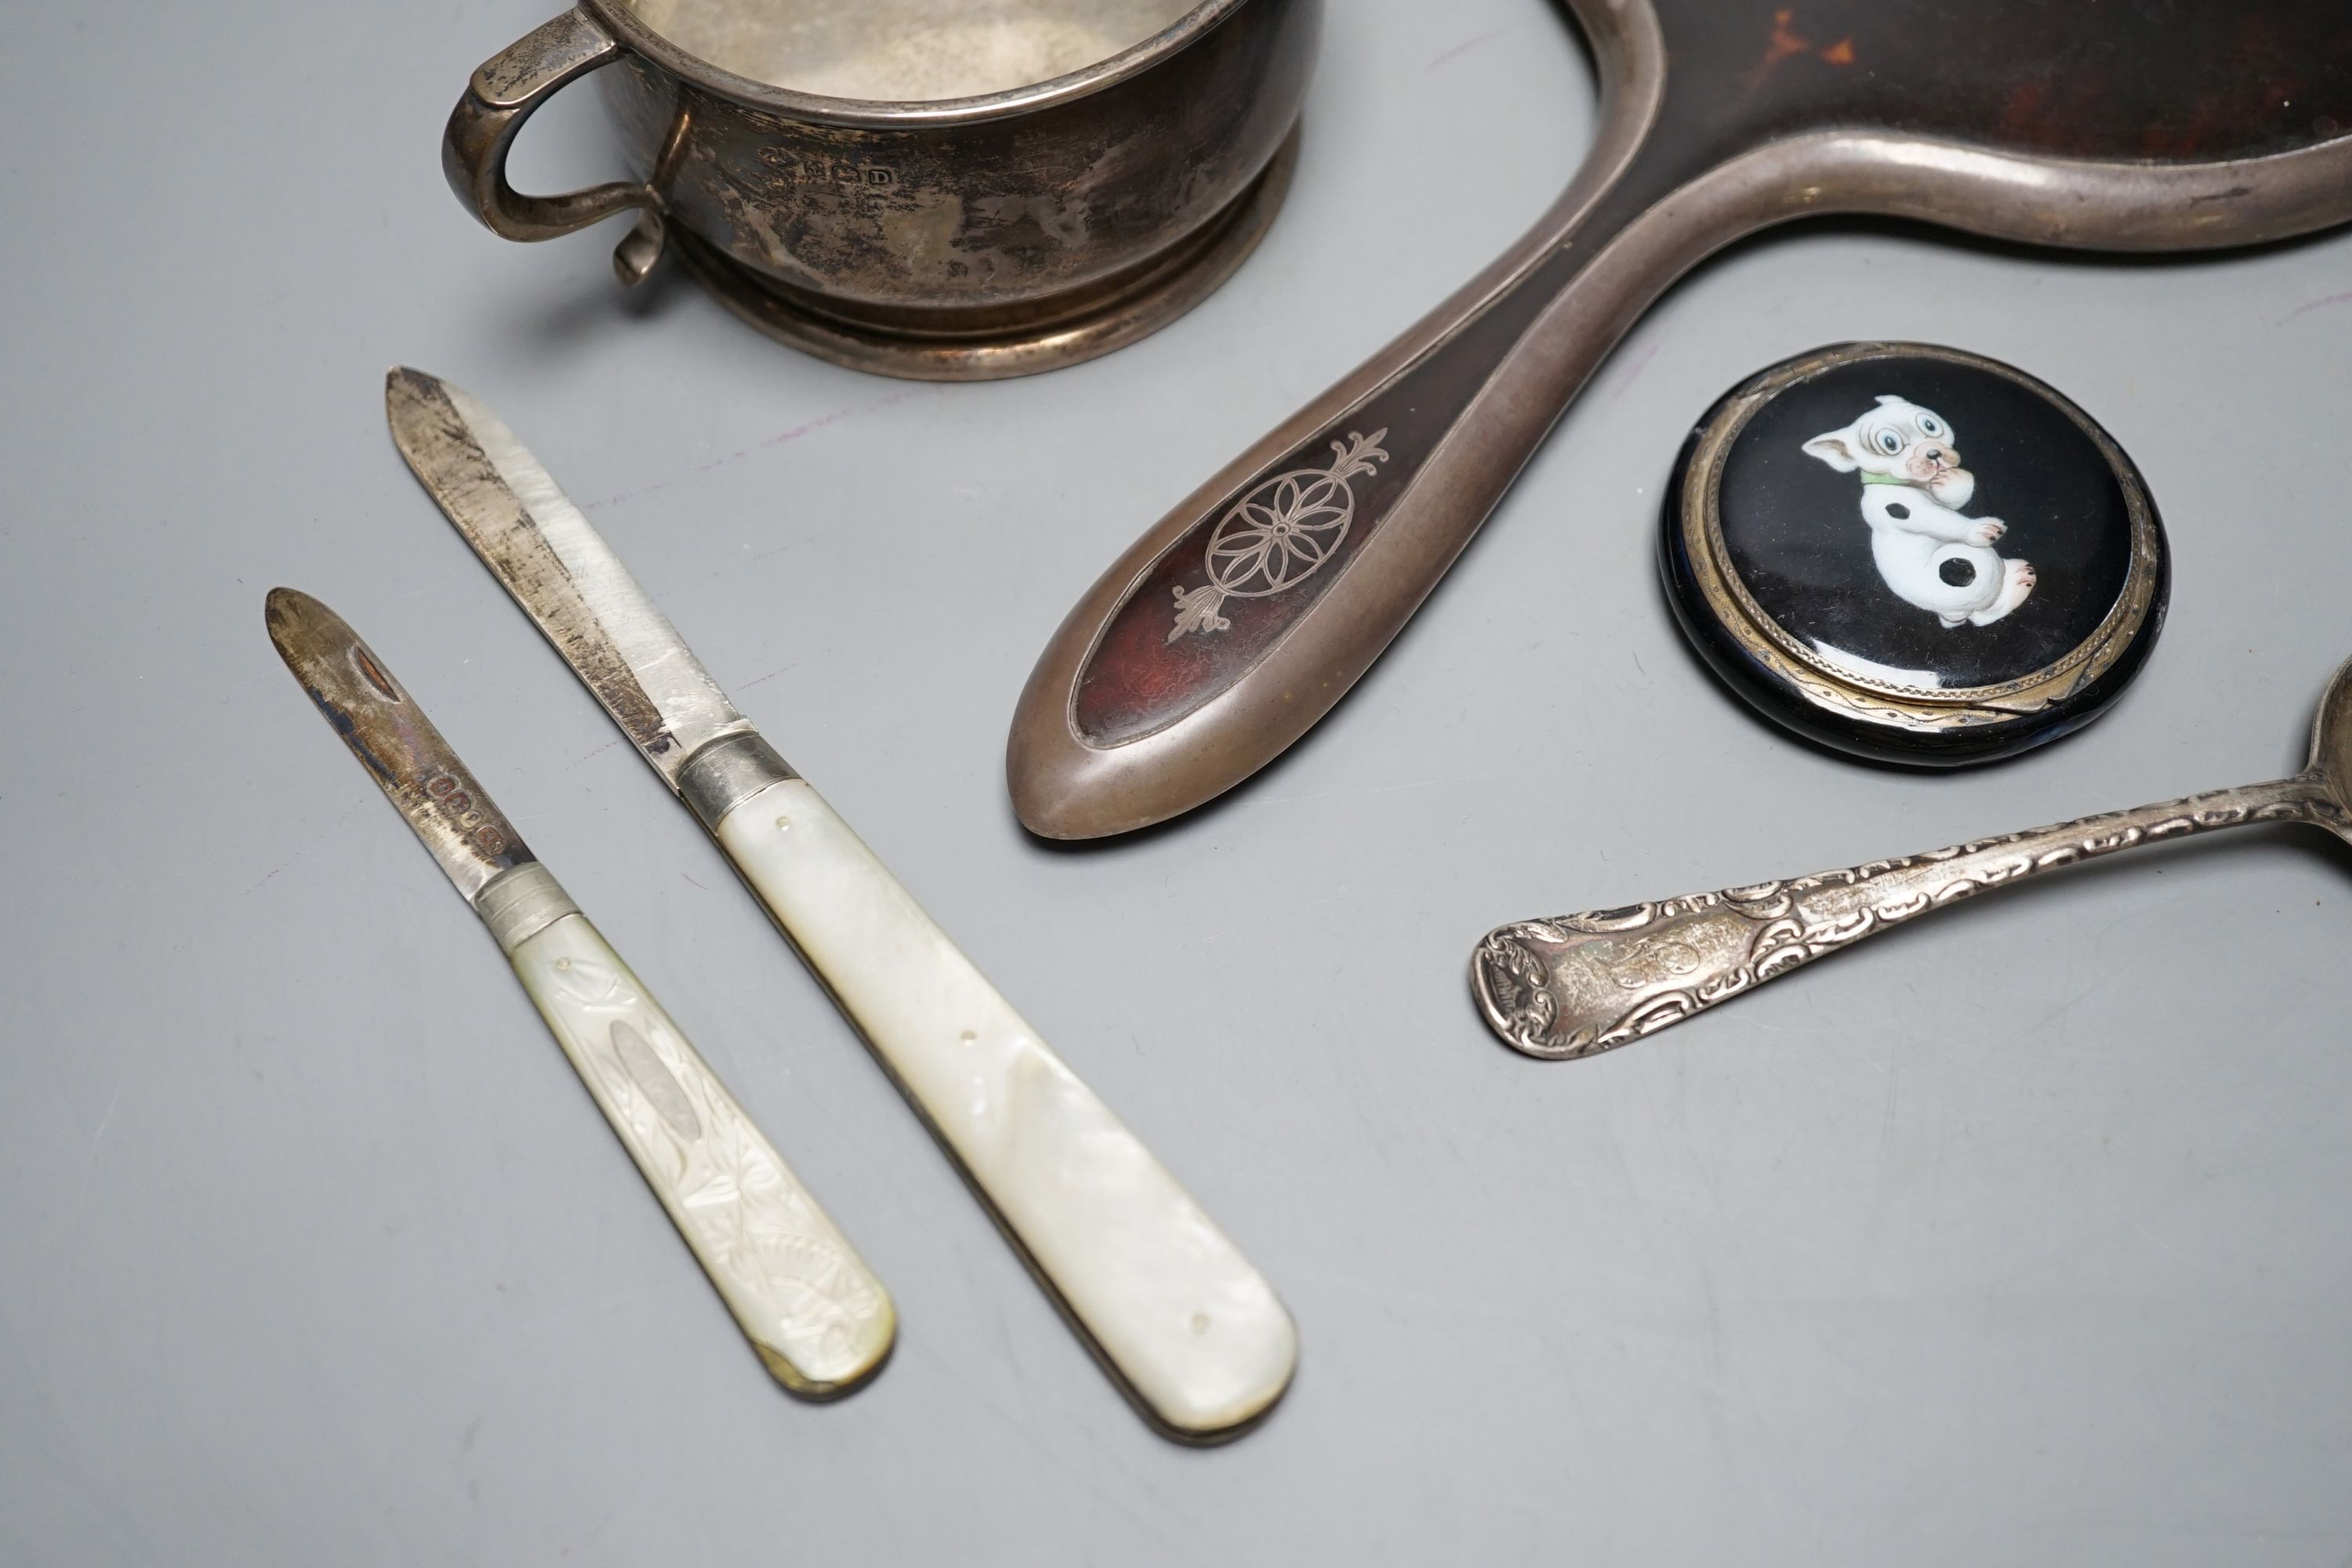 A silver two handled bowl, a silver mounted hand mirror, two silver and mother of pearl fruit knives, a silver preserve spoon and enamelled compact decorated with a dog.